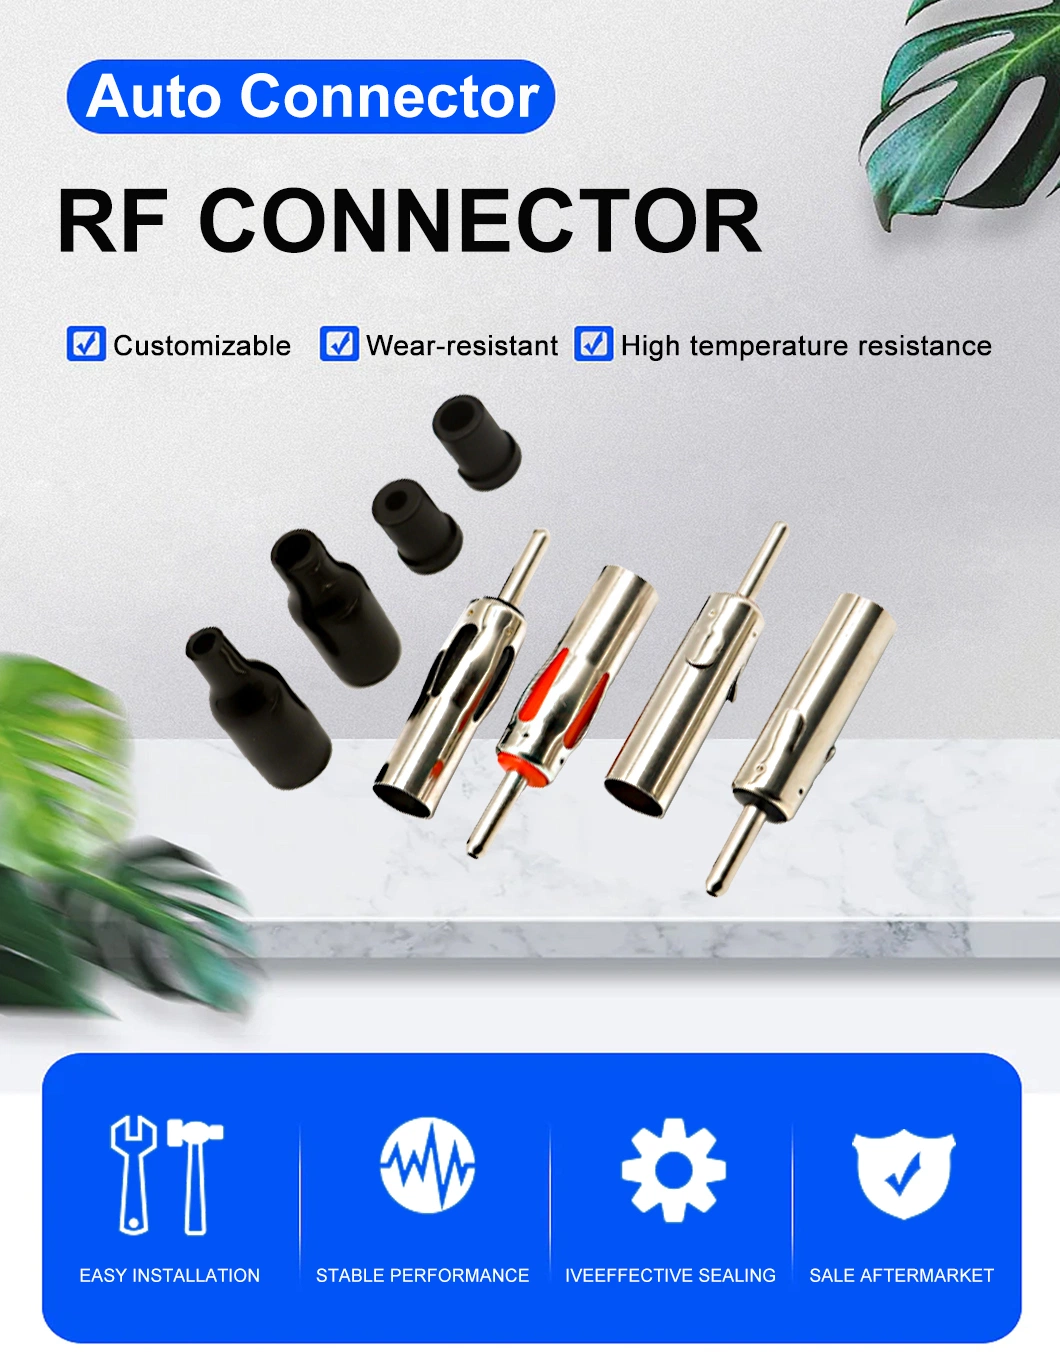 Rg174 RoHS Crimp Motorola Plug Male Electric Fakra Coaxial Cable RF Waterproof Auto Wire Sensor Antenna Connector for Automotive Radio Scanner Antenna